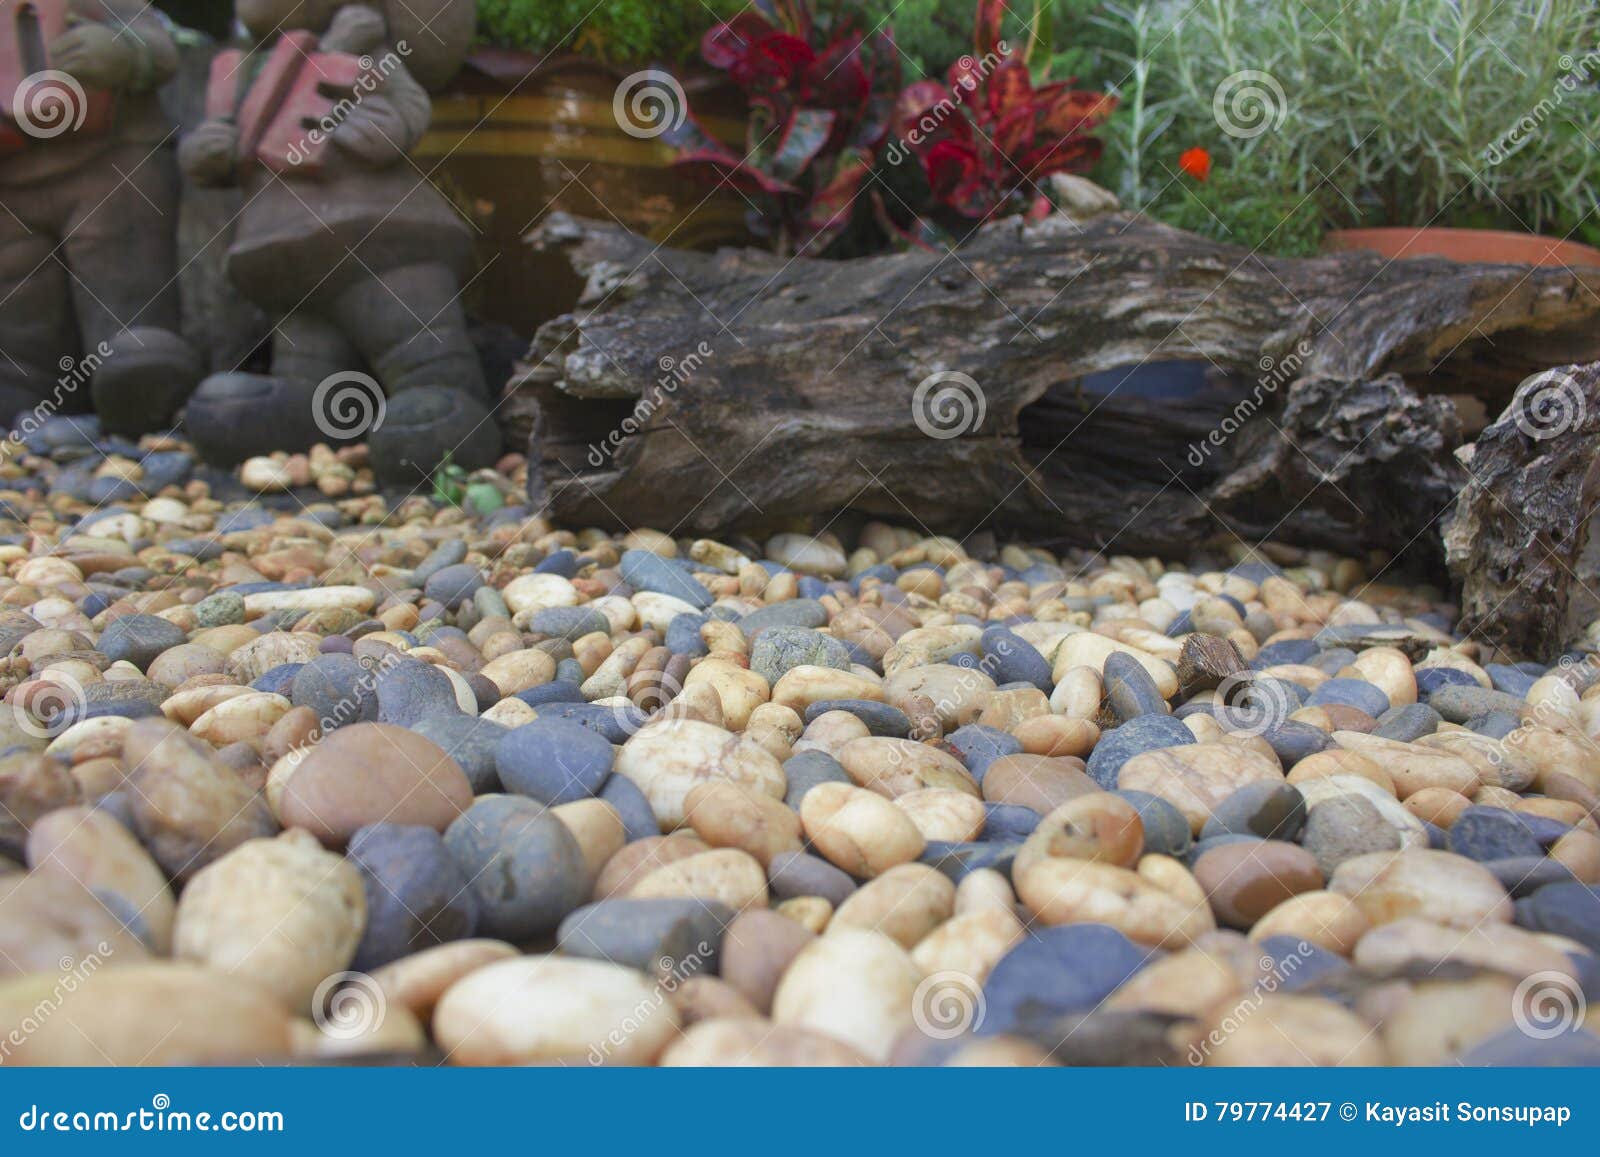 Stone Rocks Gravel And Plants In Garden Stock Image Image Of